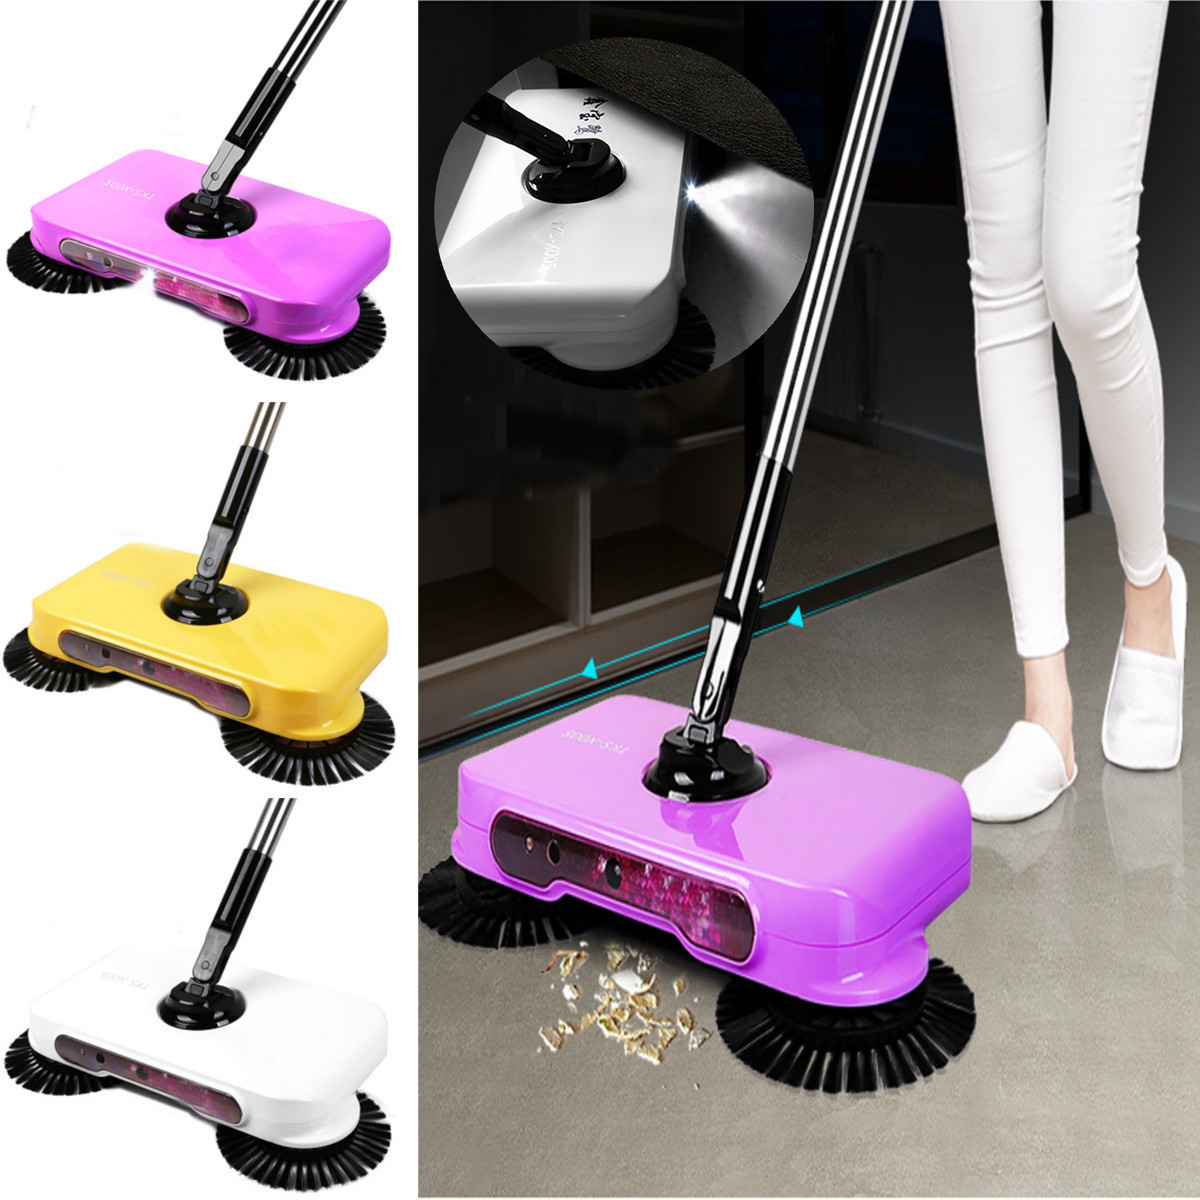 

LED Light Automatic Hand Push Sweeper Spin Broom Household Floor No Electric Home Cleaning Tools